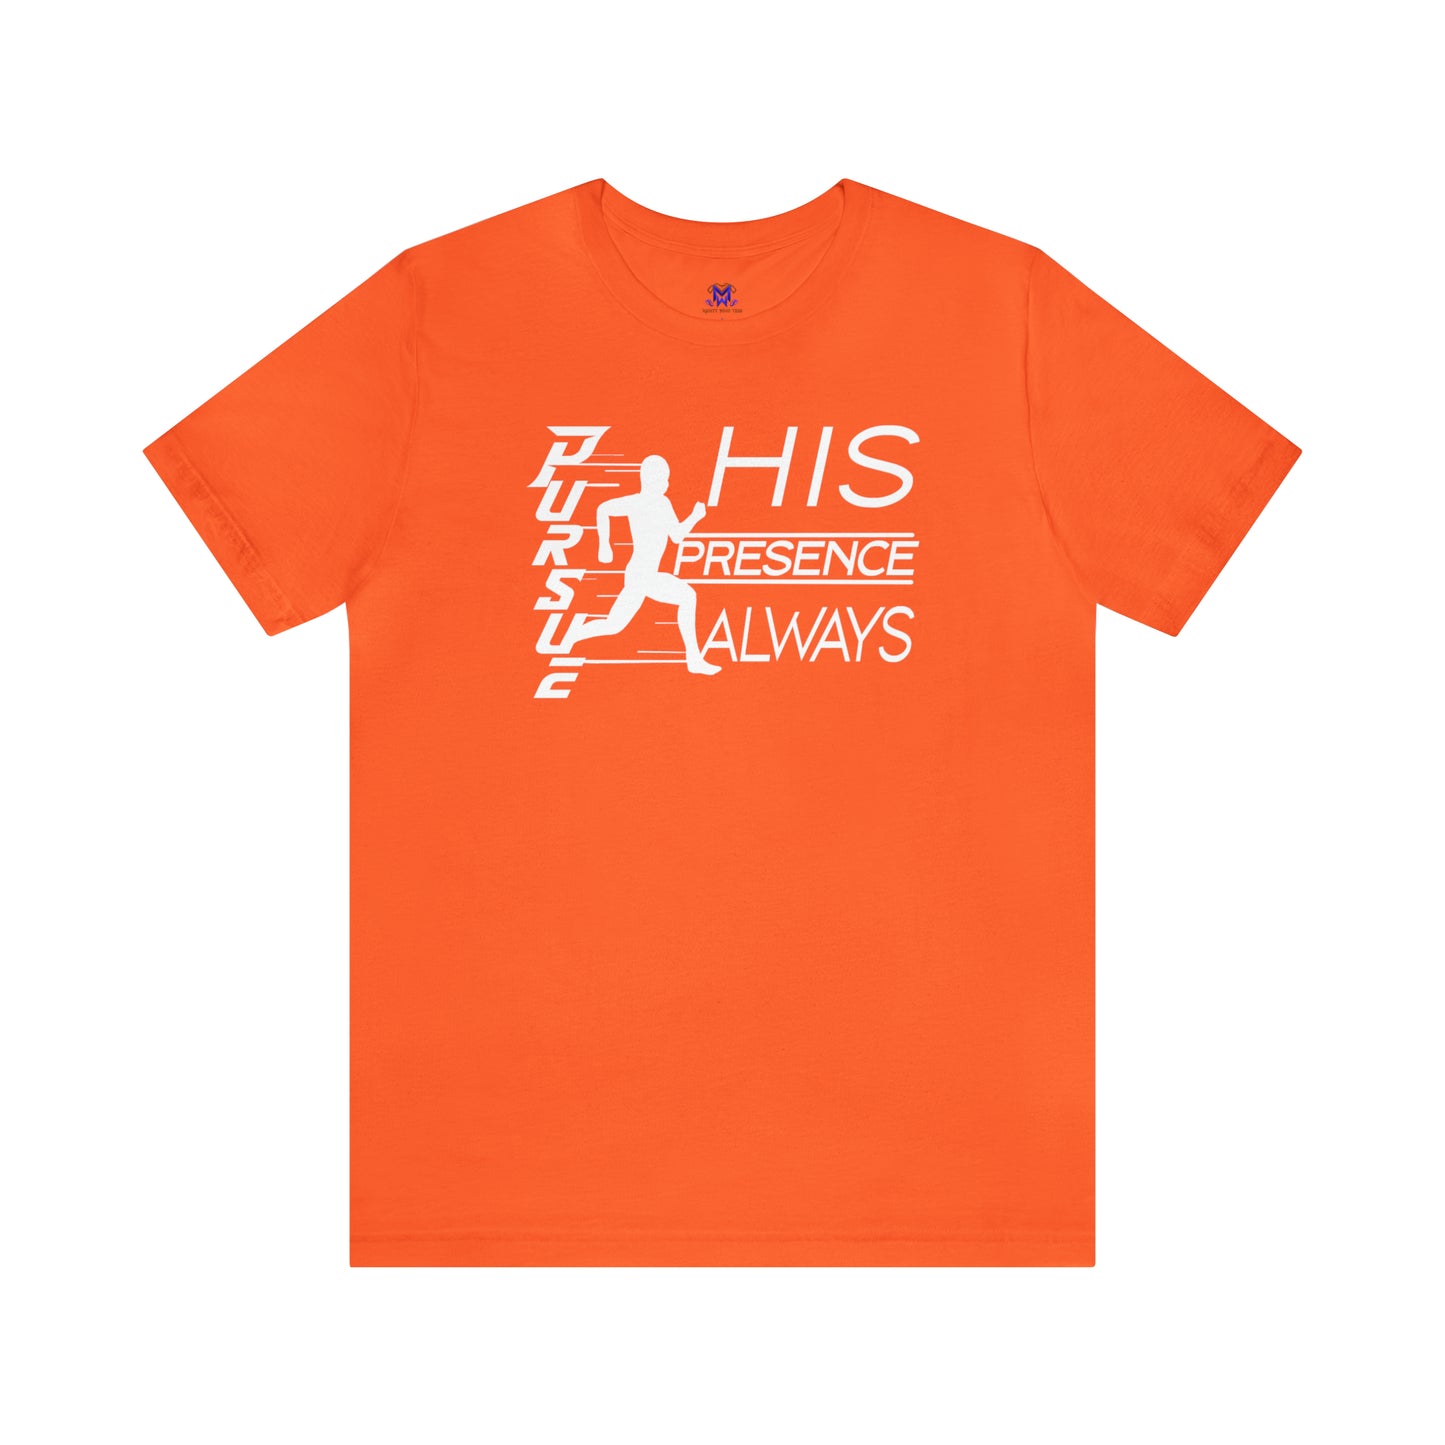 Pursue HIS Presence (Available in more colors)